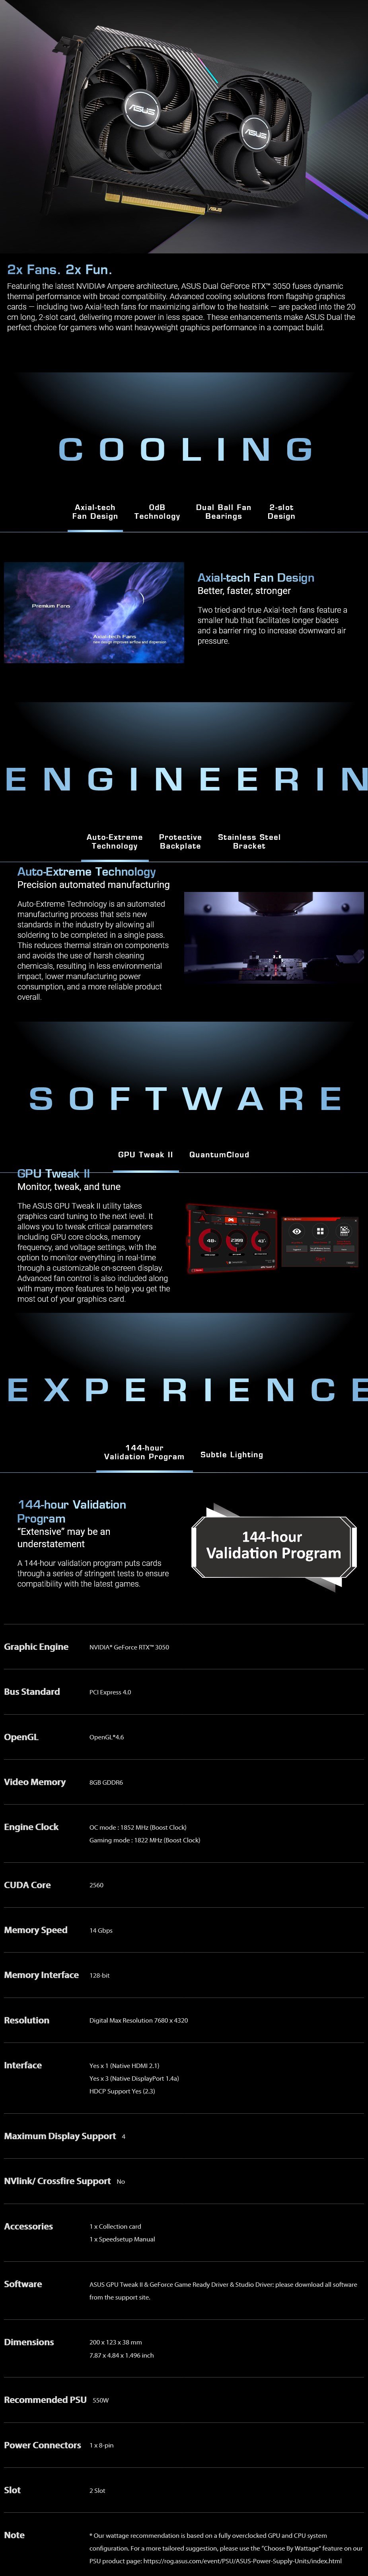 A large marketing image providing additional information about the product ASUS GeForce RTX 3050 Dual OC 8GB GDDR6 - Additional alt info not provided